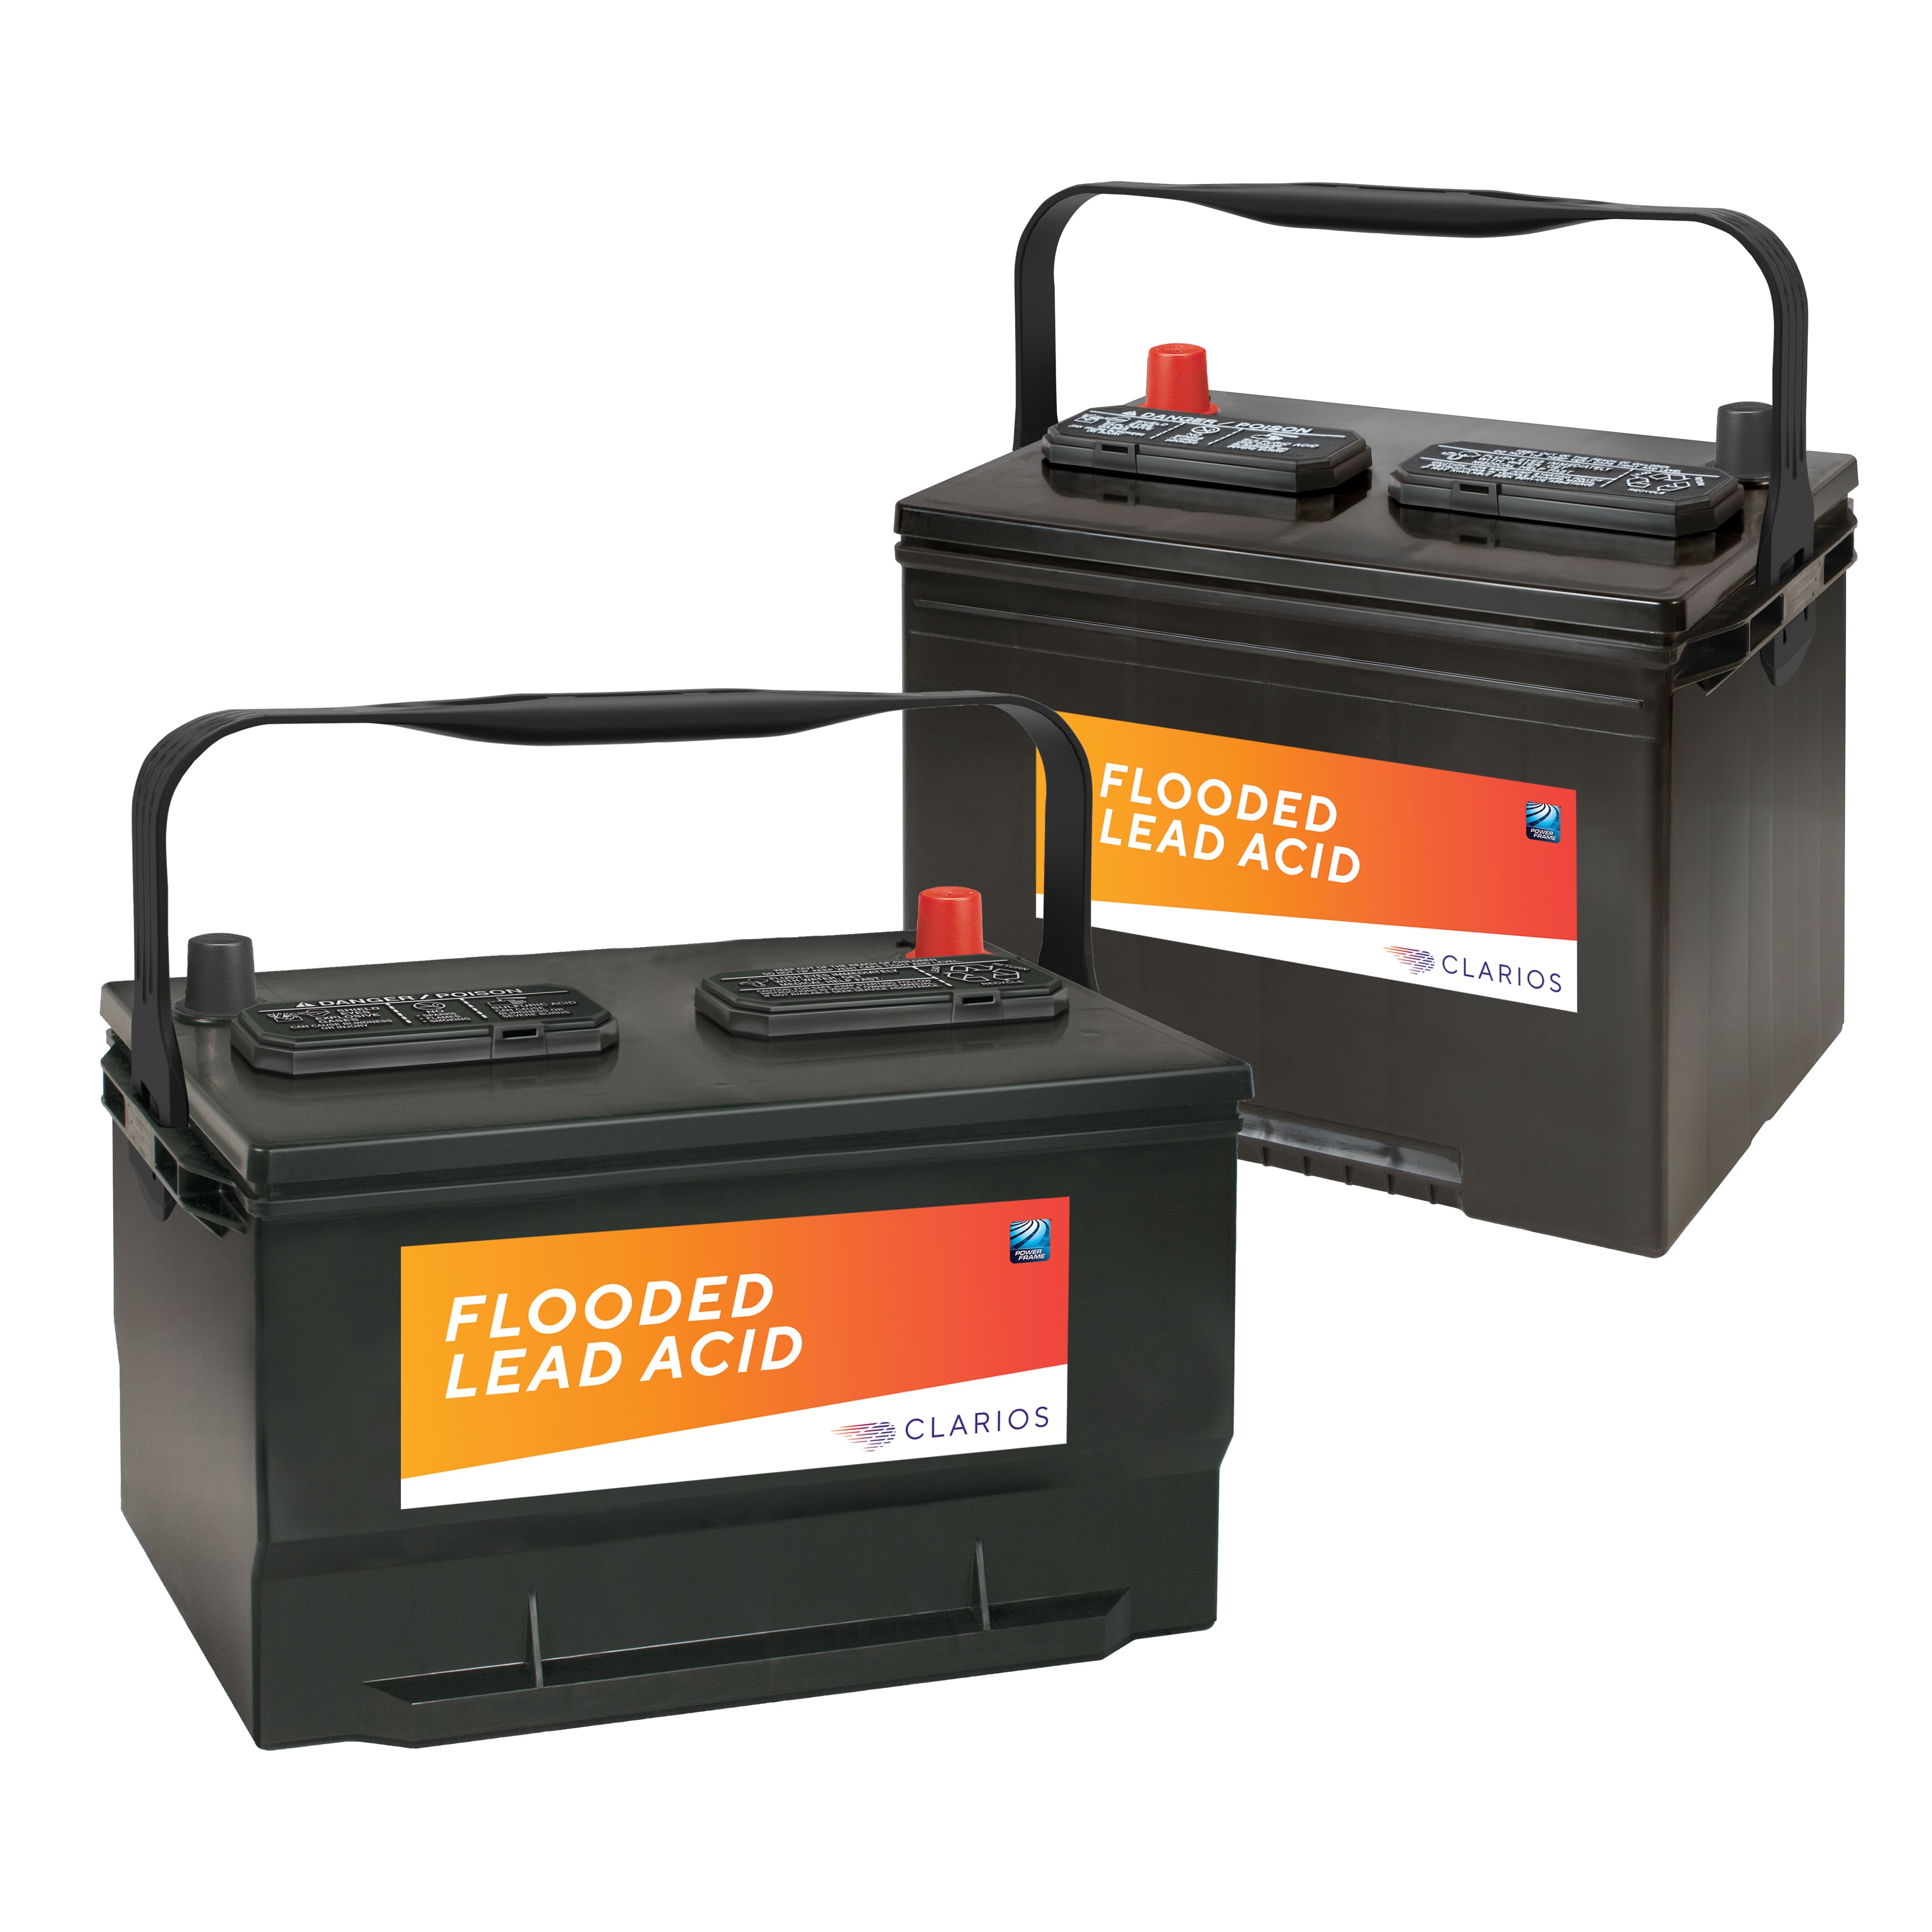 The conventional flooded lead-acid battery is designed to deliver quick bursts of power